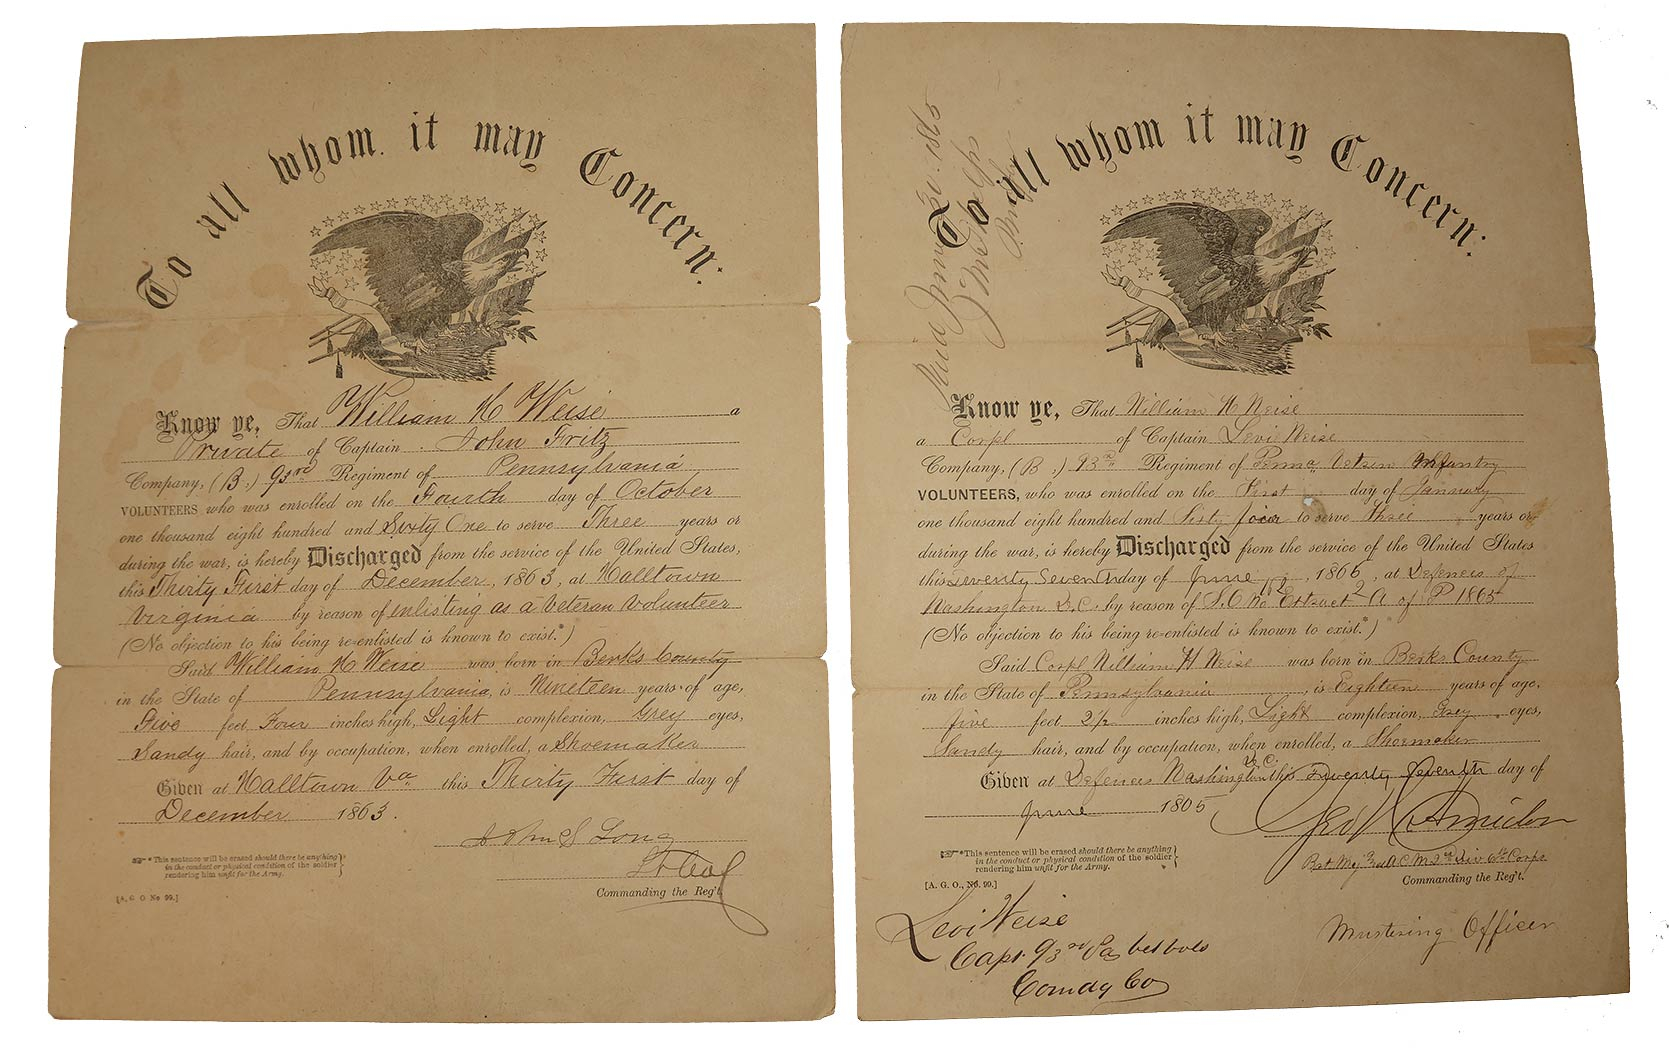 PAIR OF DISCHARGES FOR WILLIAM WEISE, 93RD PENNSYLVANIA INFANTRY